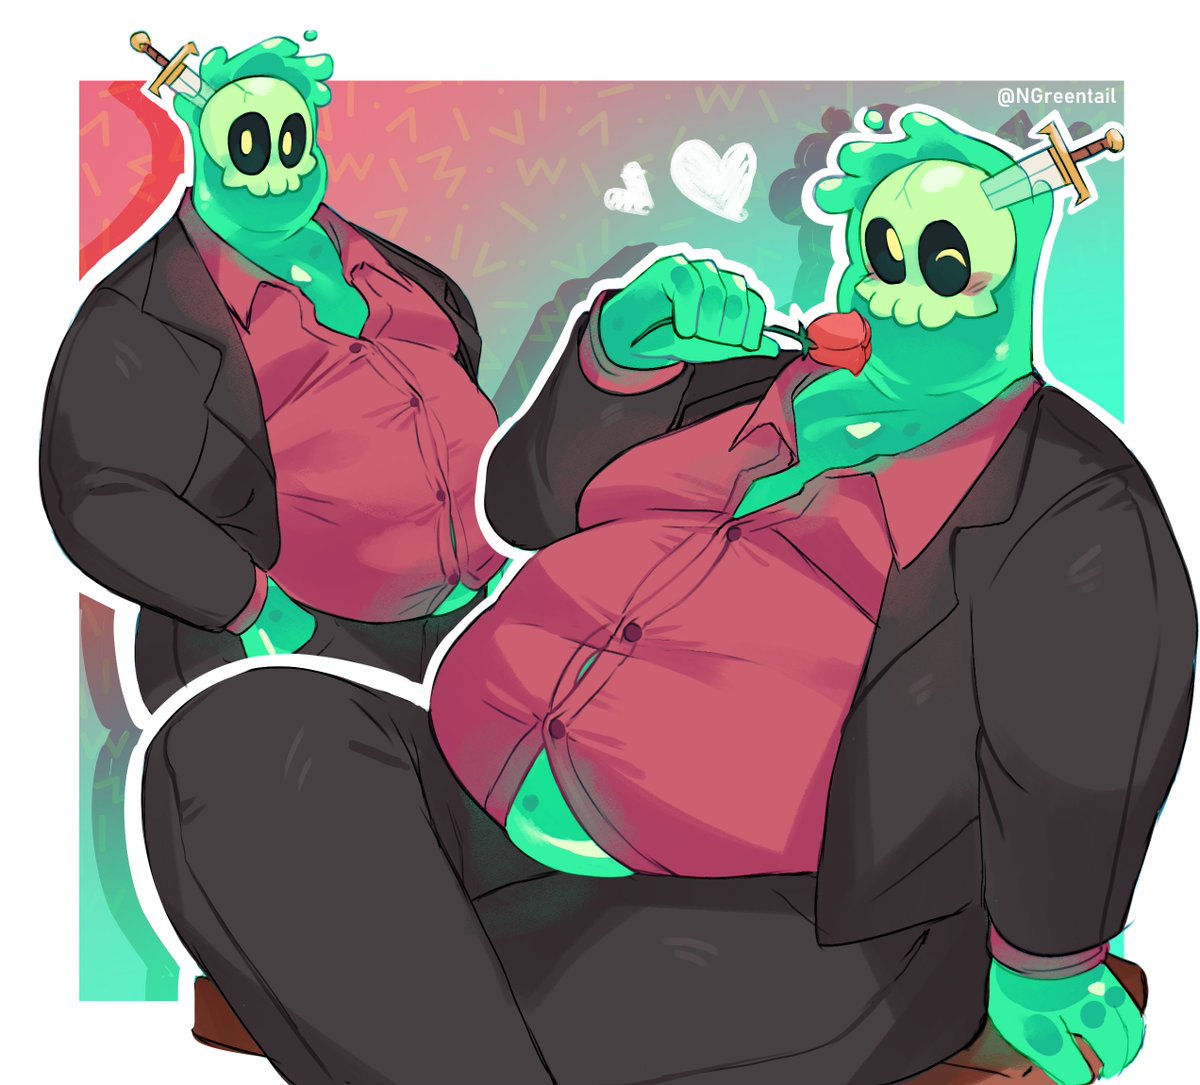 Hubby at the prom...💚🌹 #MonsterCon #monsterprom